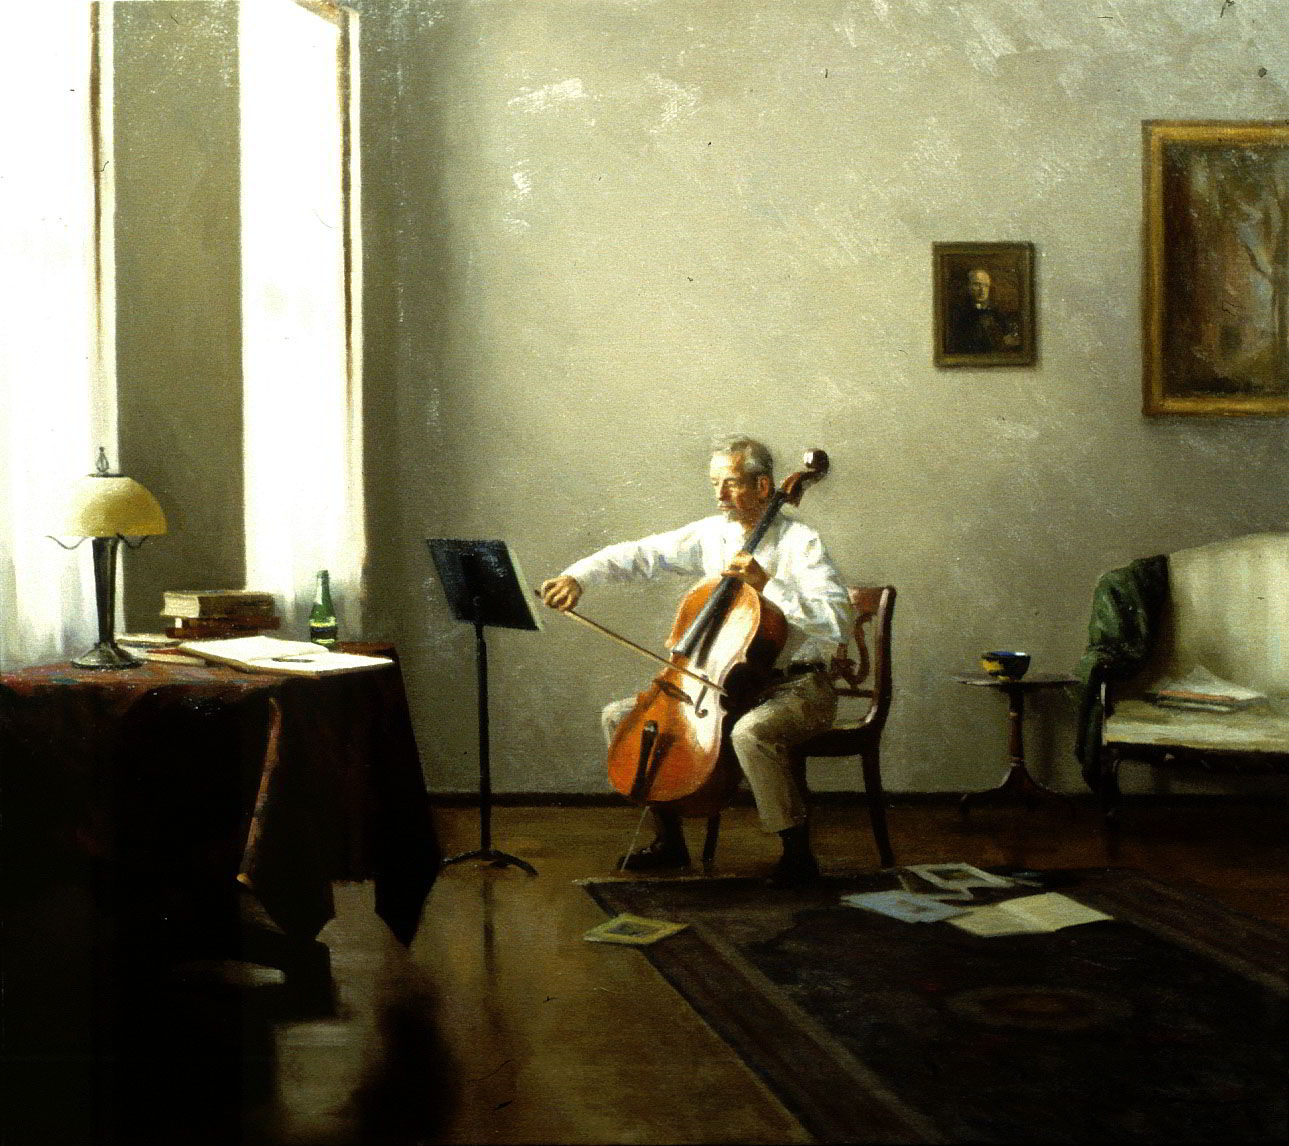 Man playing a Cello by Steven J Levin